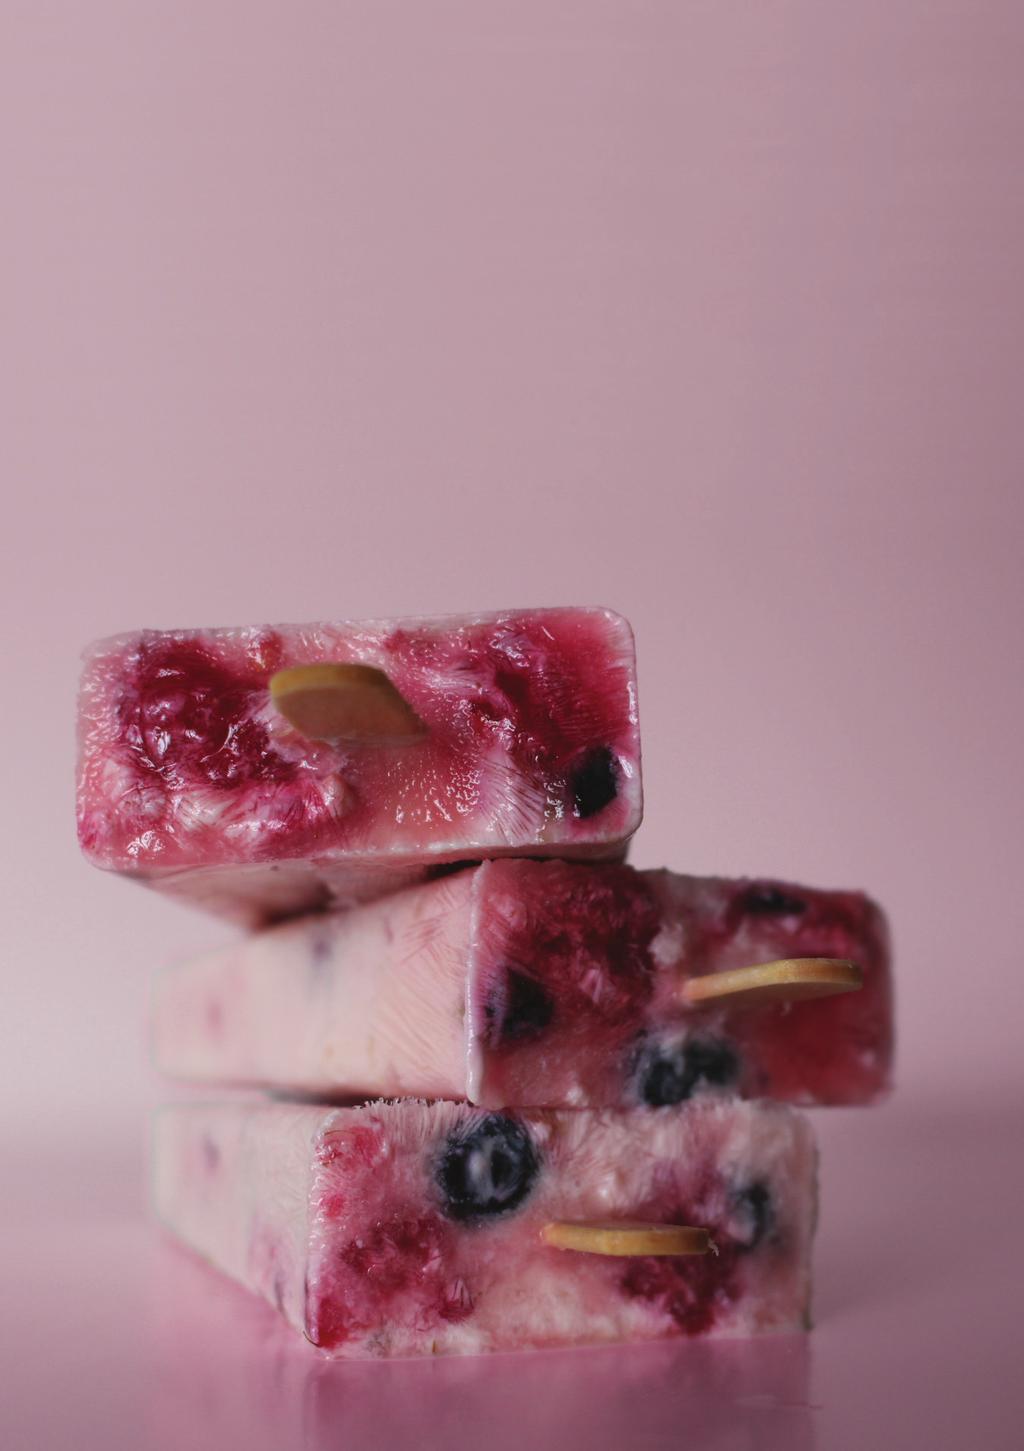 Ice block double dip Smashed berry pops [Serves 4] ½ cup frozen mixed berries 1 cup reduced fat Greek yoghurt juice of ½ lime 4 tsp. honey Method: In a bowl, mix together berries, lime and honey.